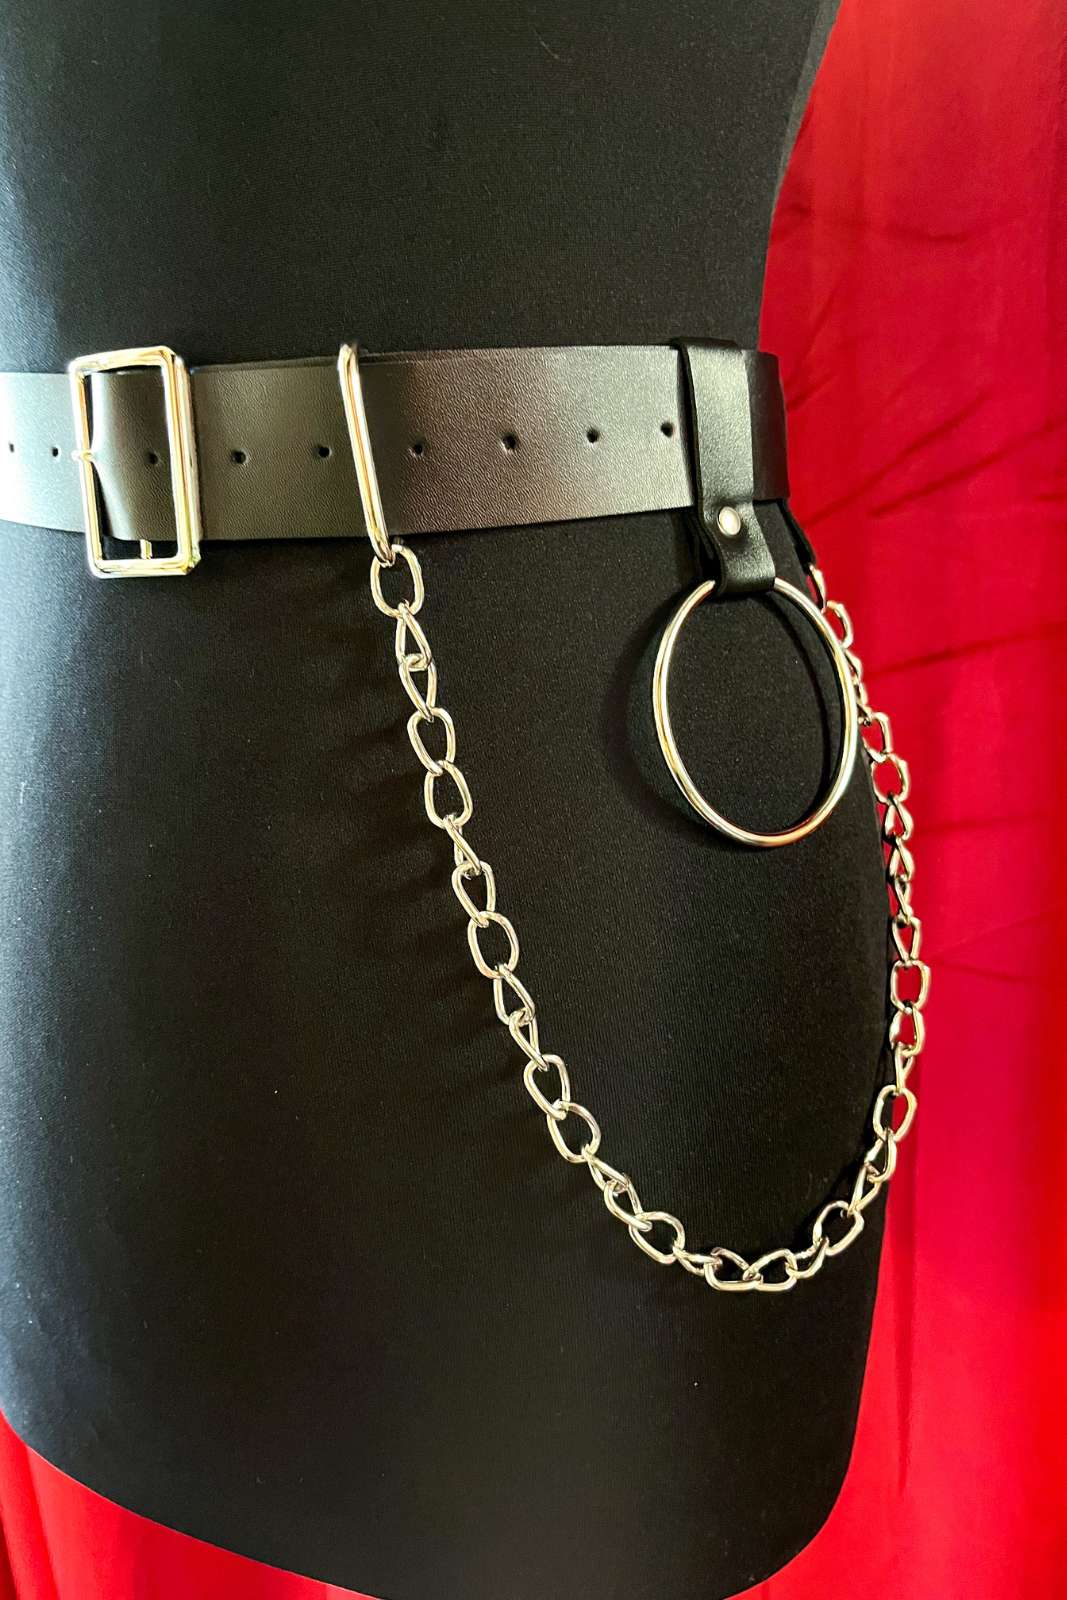 Black faux leather belt with silver chain